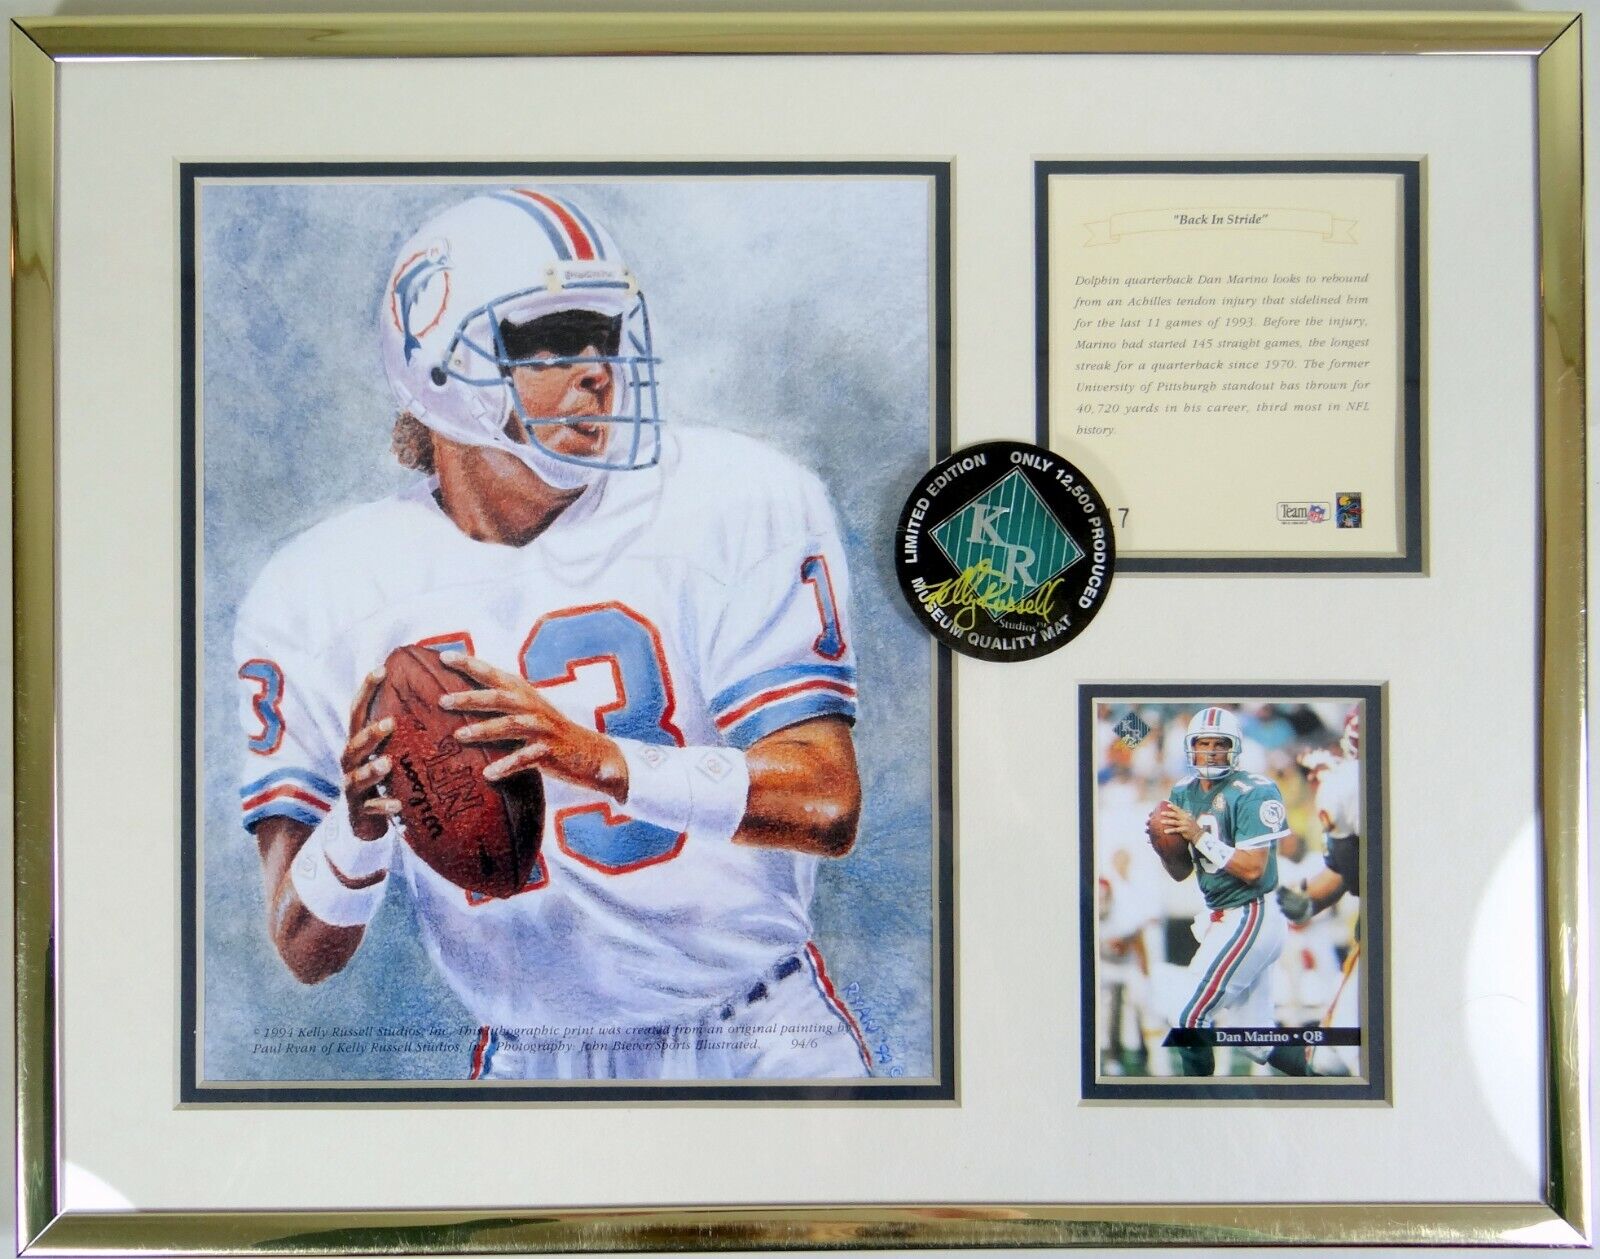 Dan Marino Picture Art Photo Print NFL Card Miami Dolphins 1994 Limited Edition